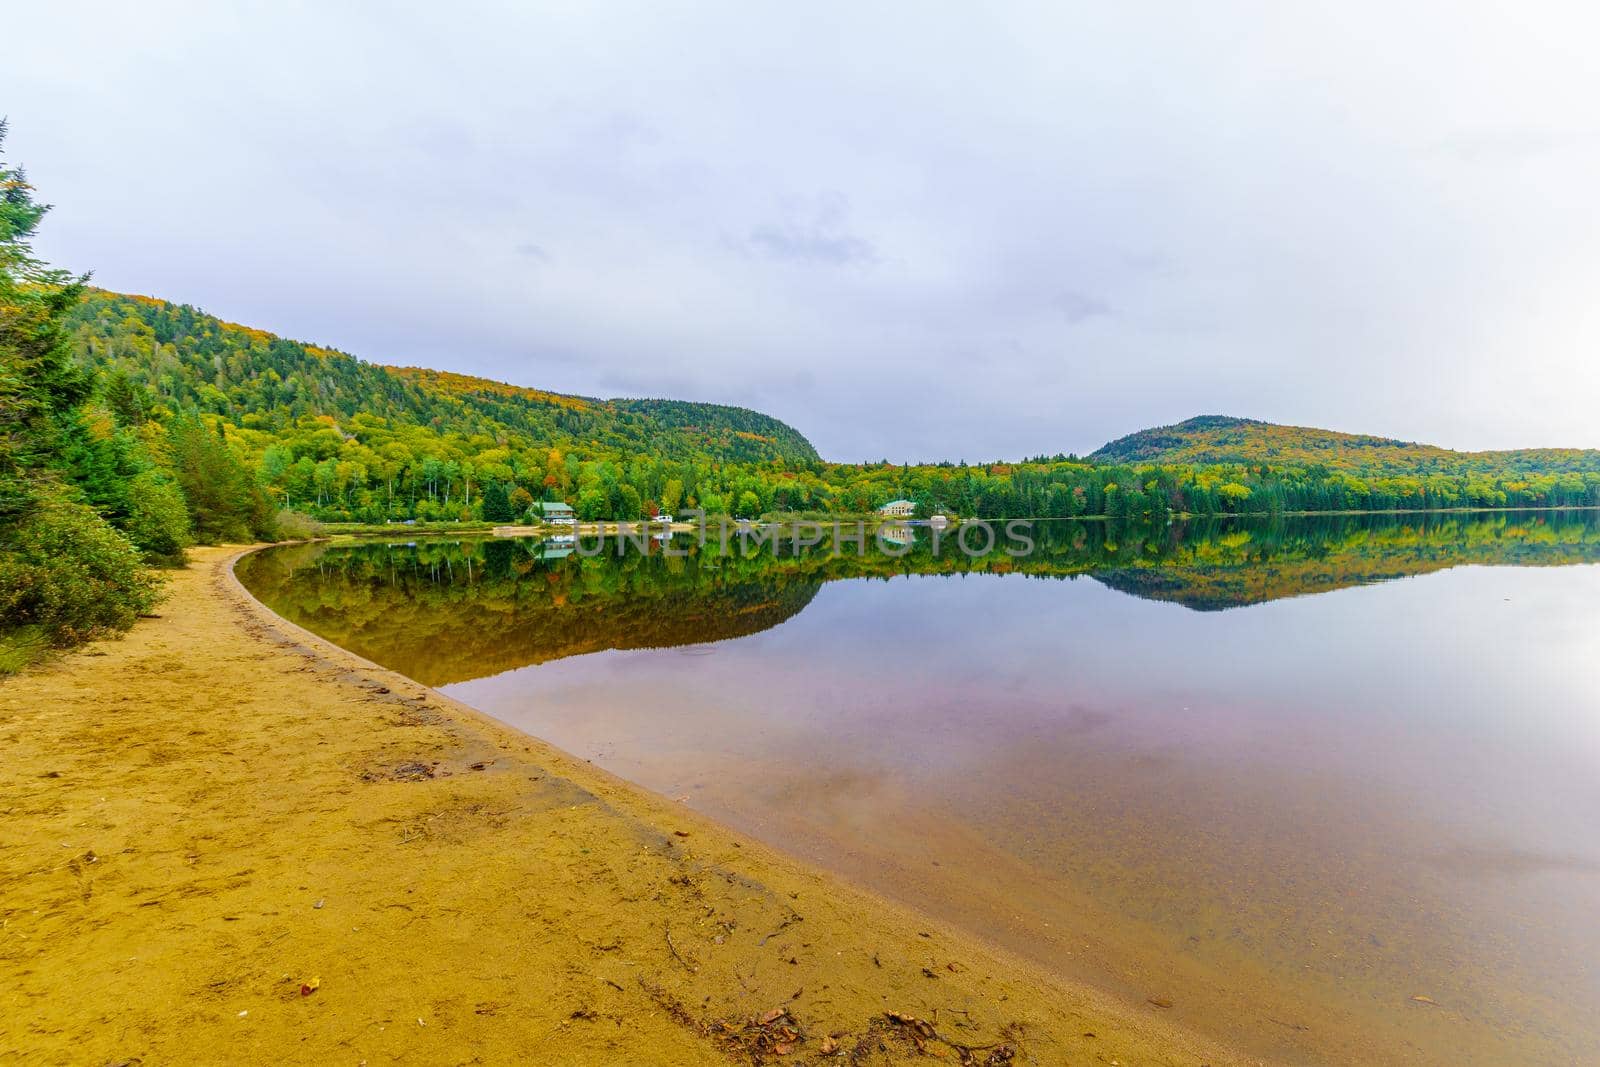 View of the Petit Lac Monroe, in Mont Tremblant National Park, Quebec, Canada